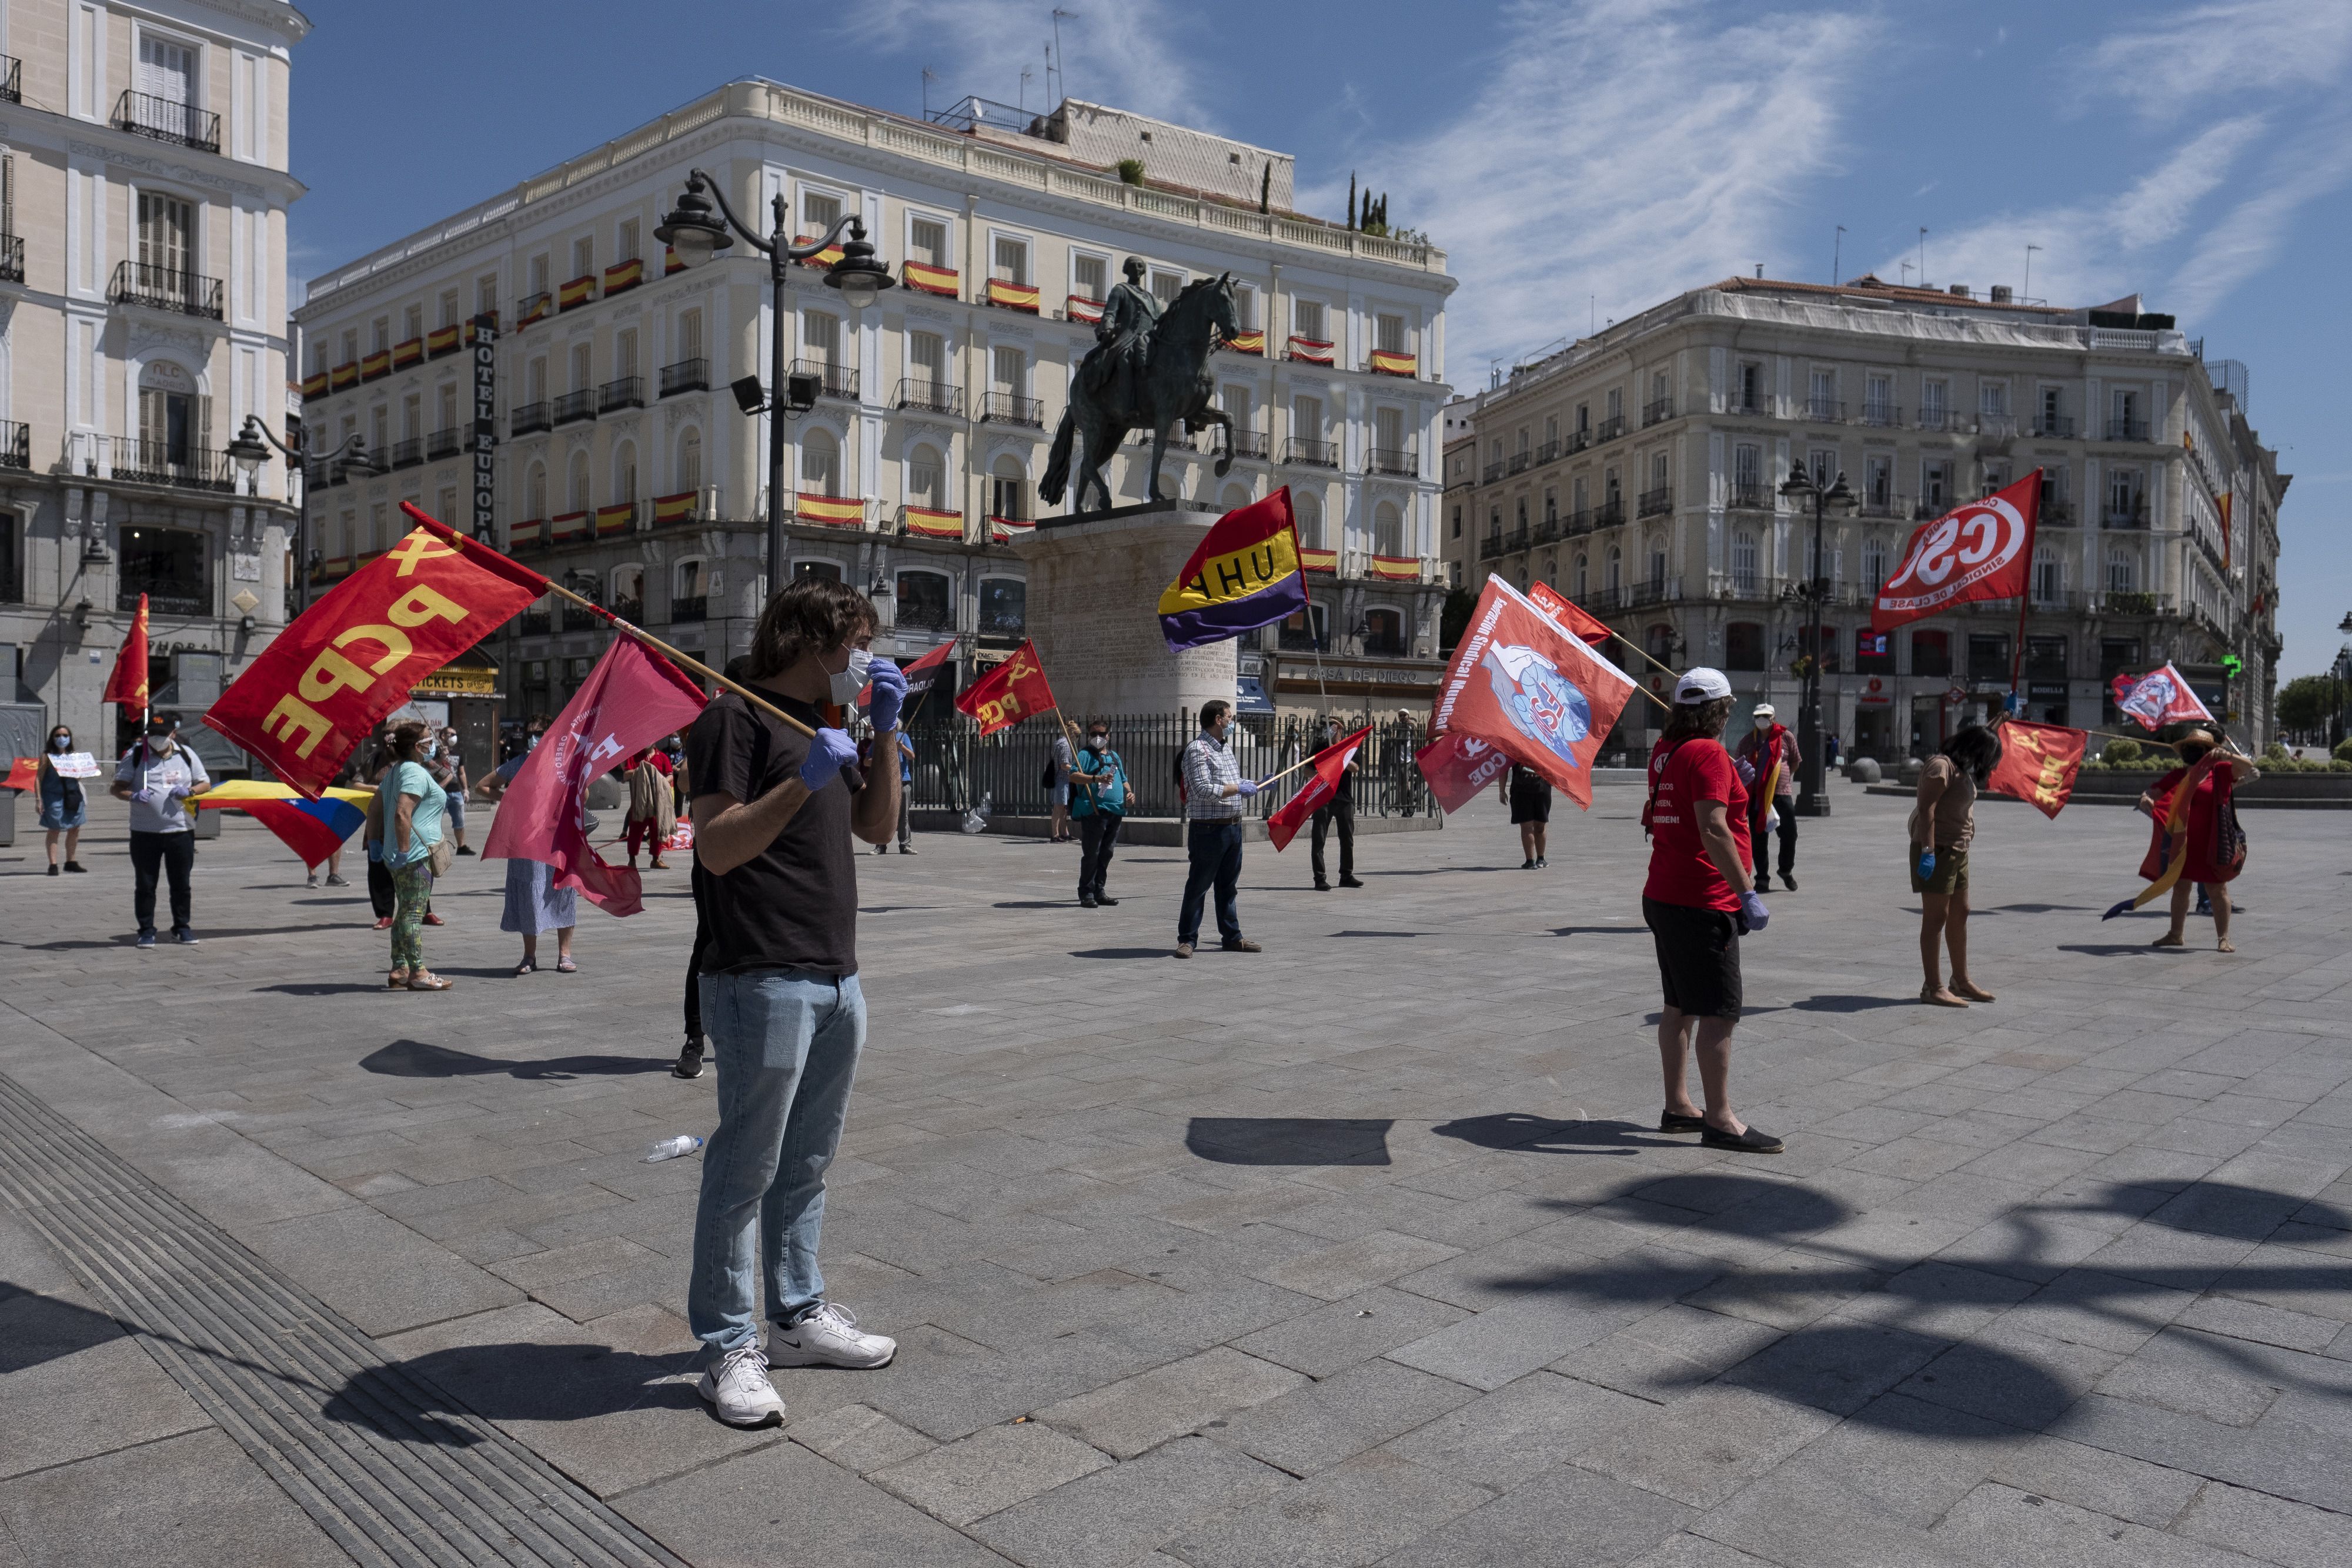 Protestors socially distance and hold flags in a square